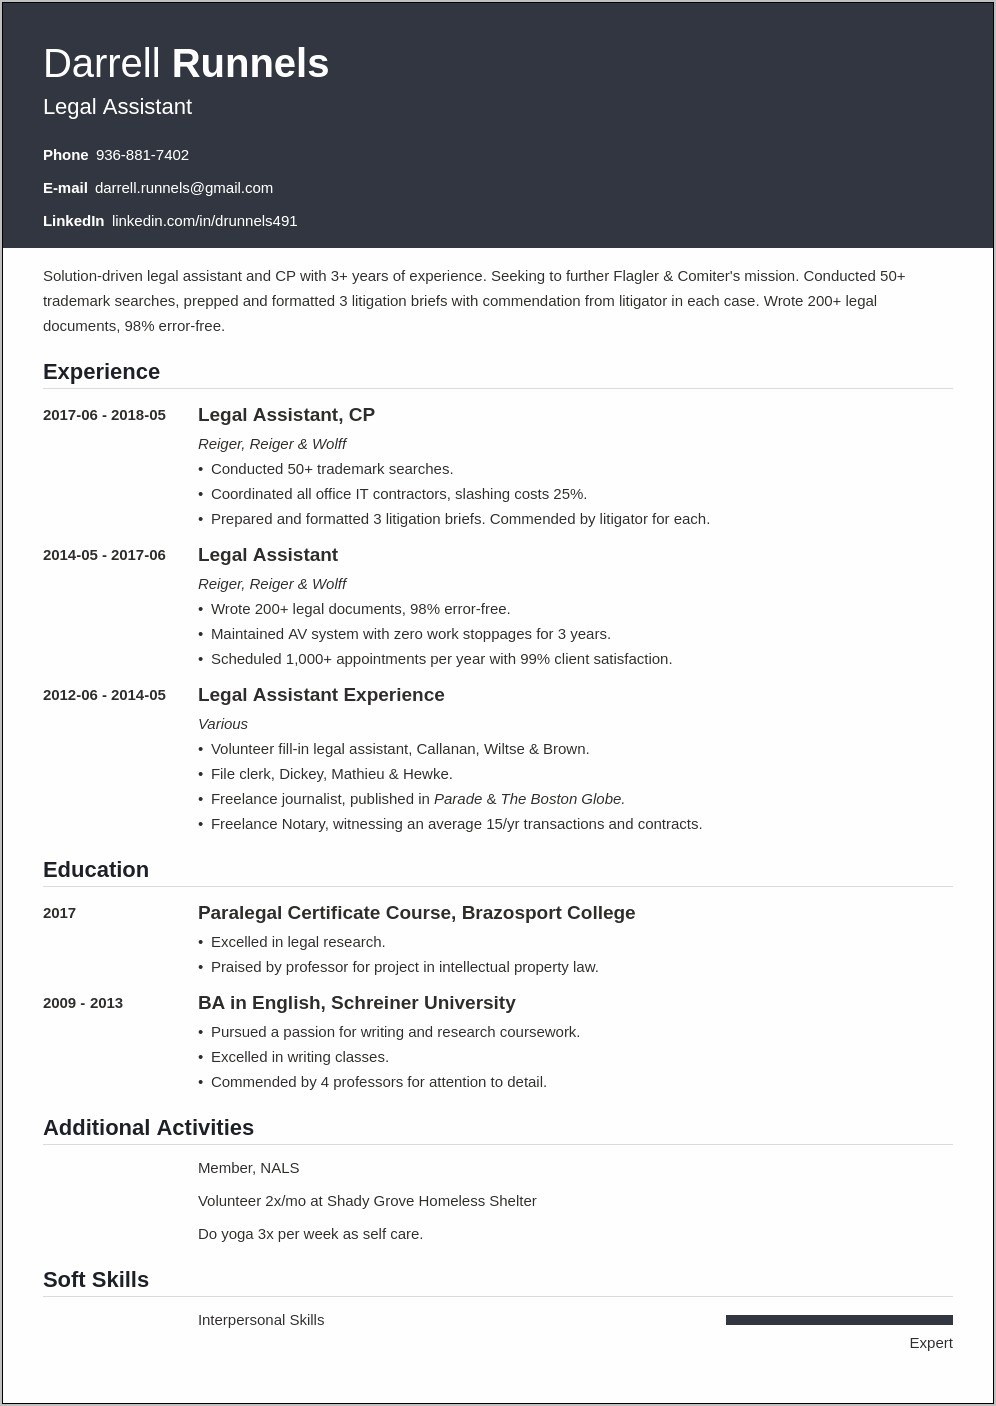 Resume Objective Examples Legal Assistant